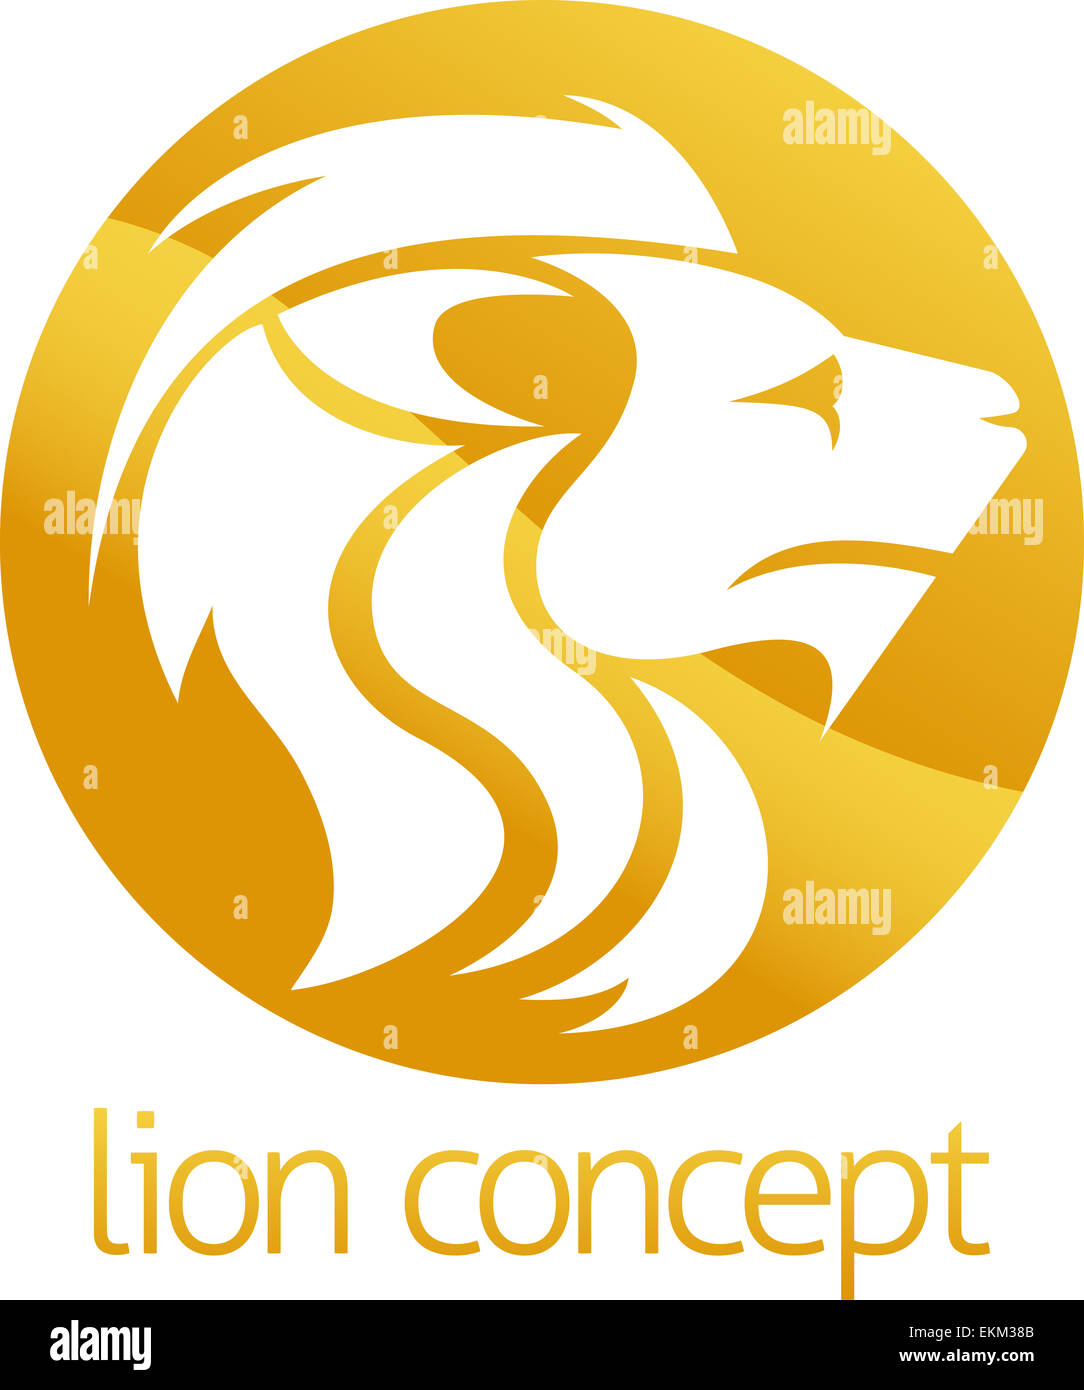 An abstract illustration of a lion circle concept design Stock Photo